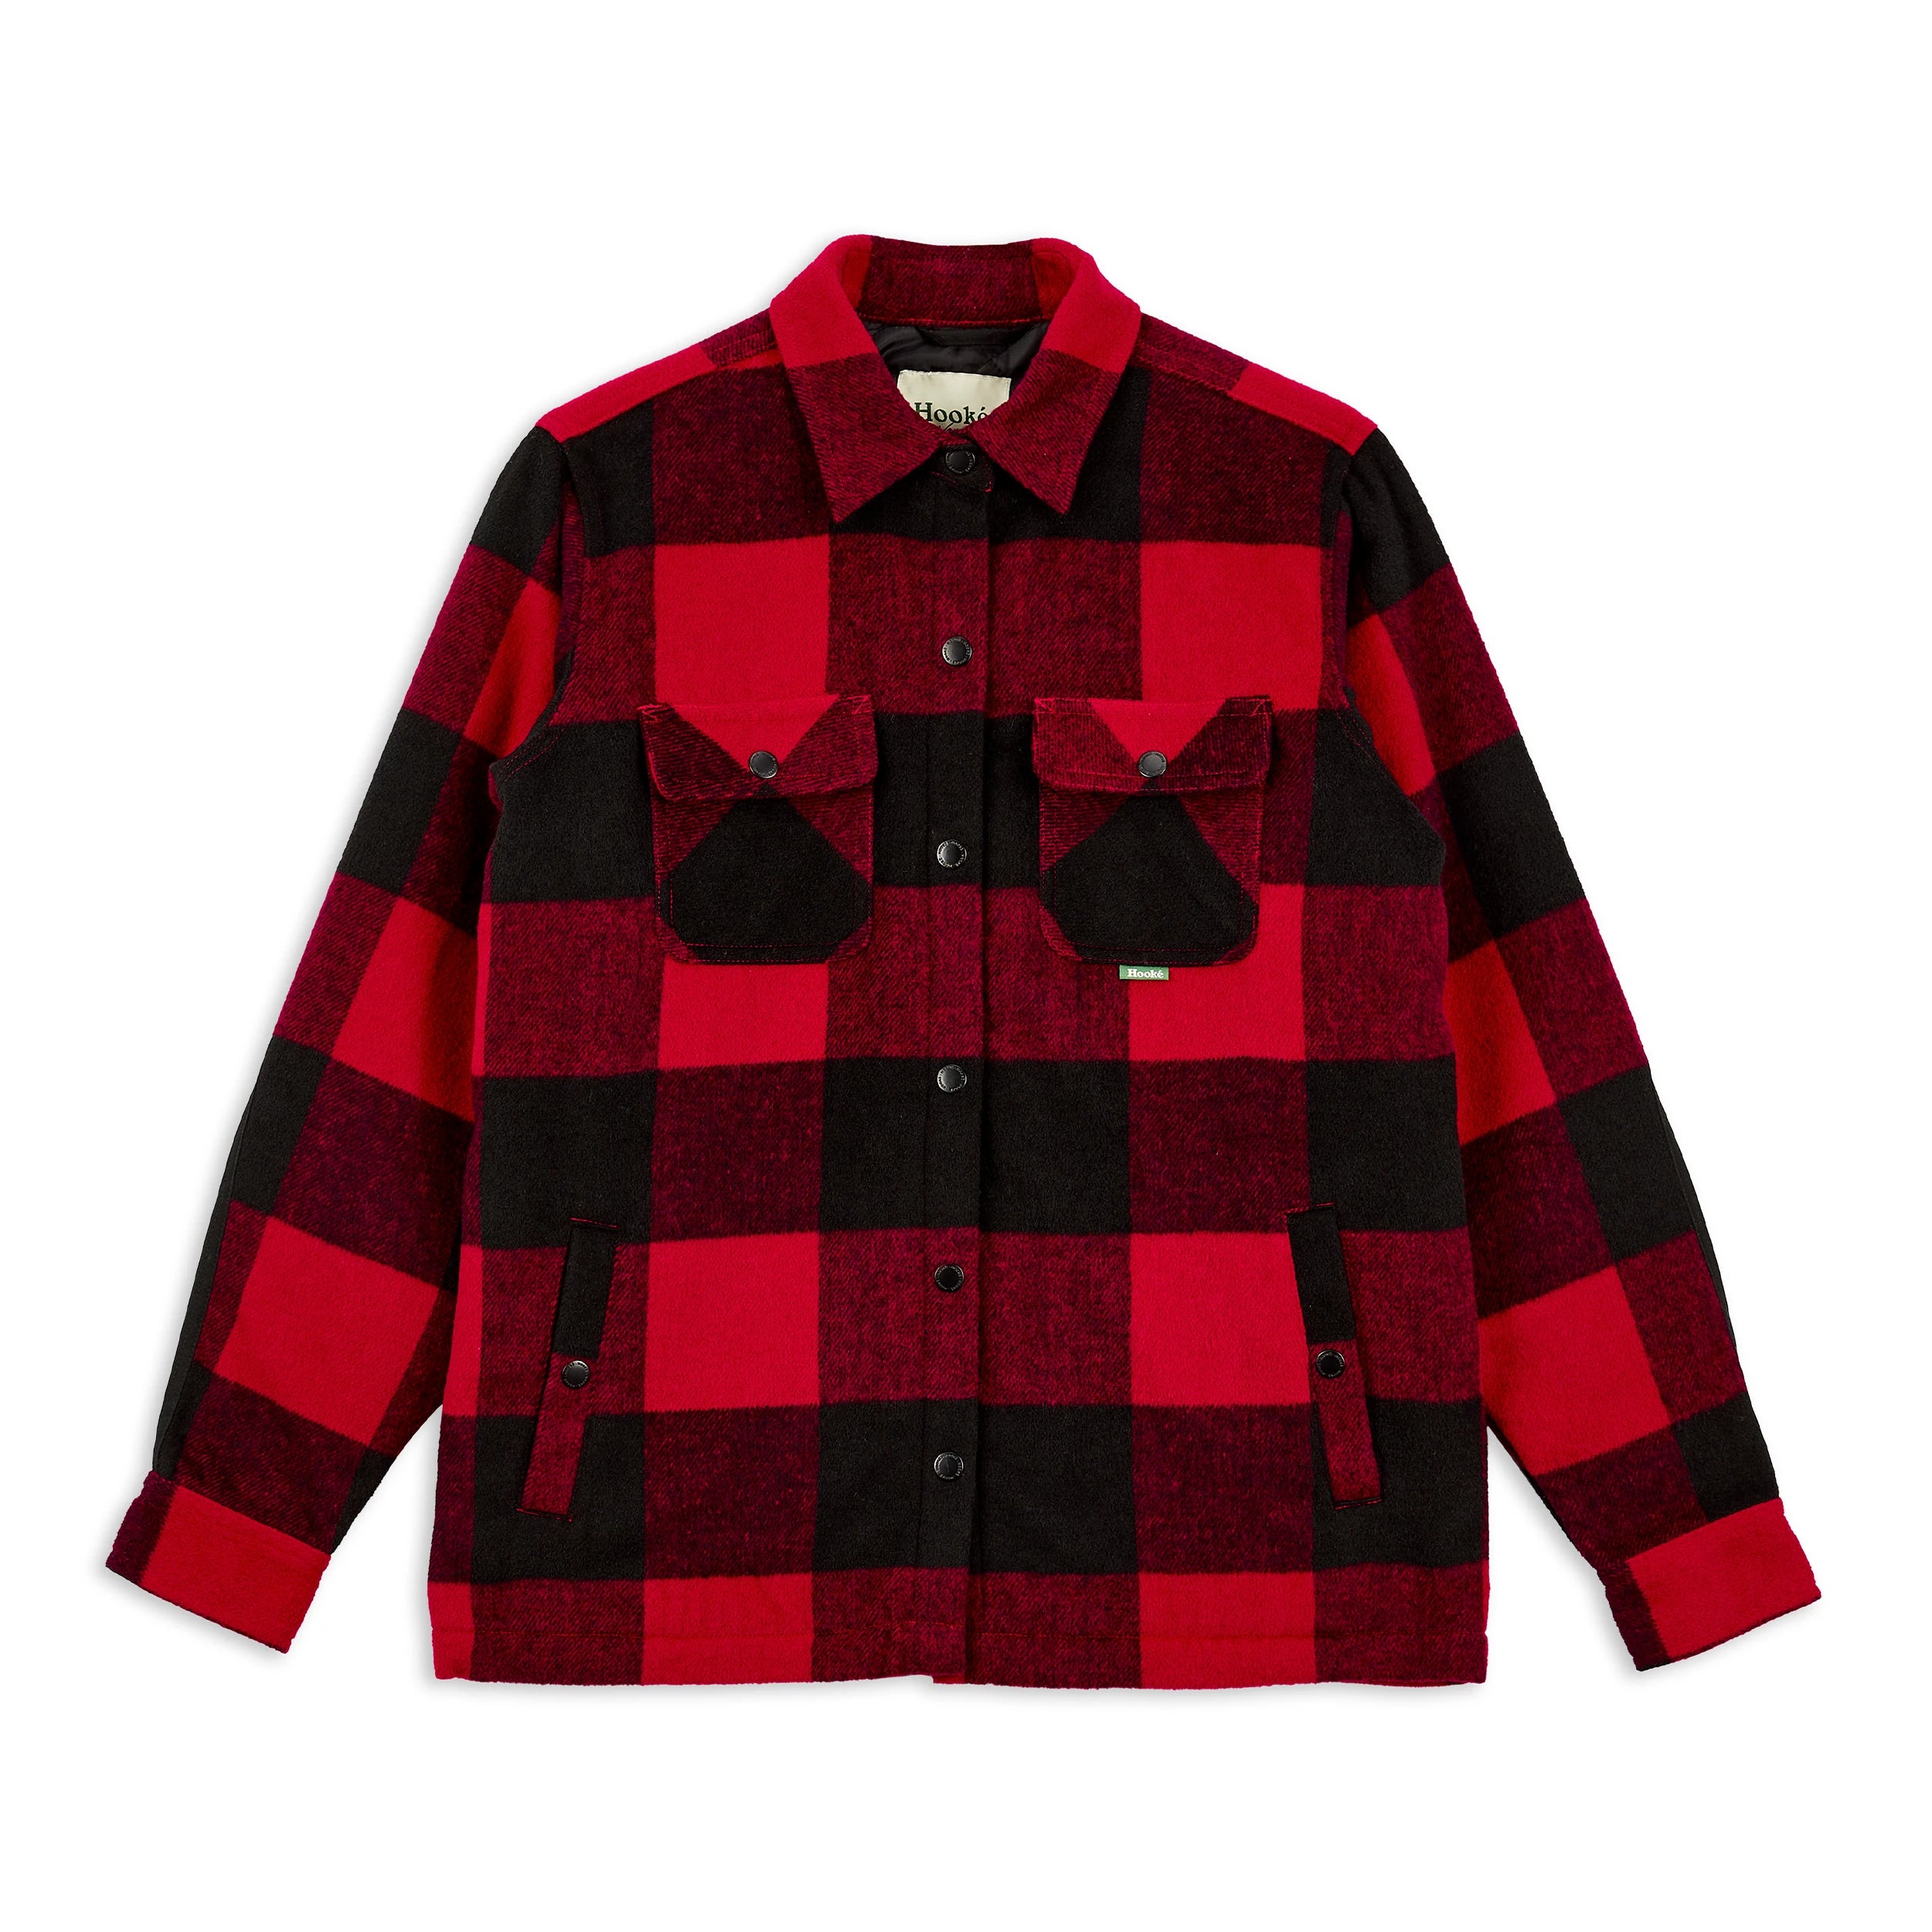 Red / Black Flannel Lined Shirt with Hood by GATTS Workwear - Style626DCF